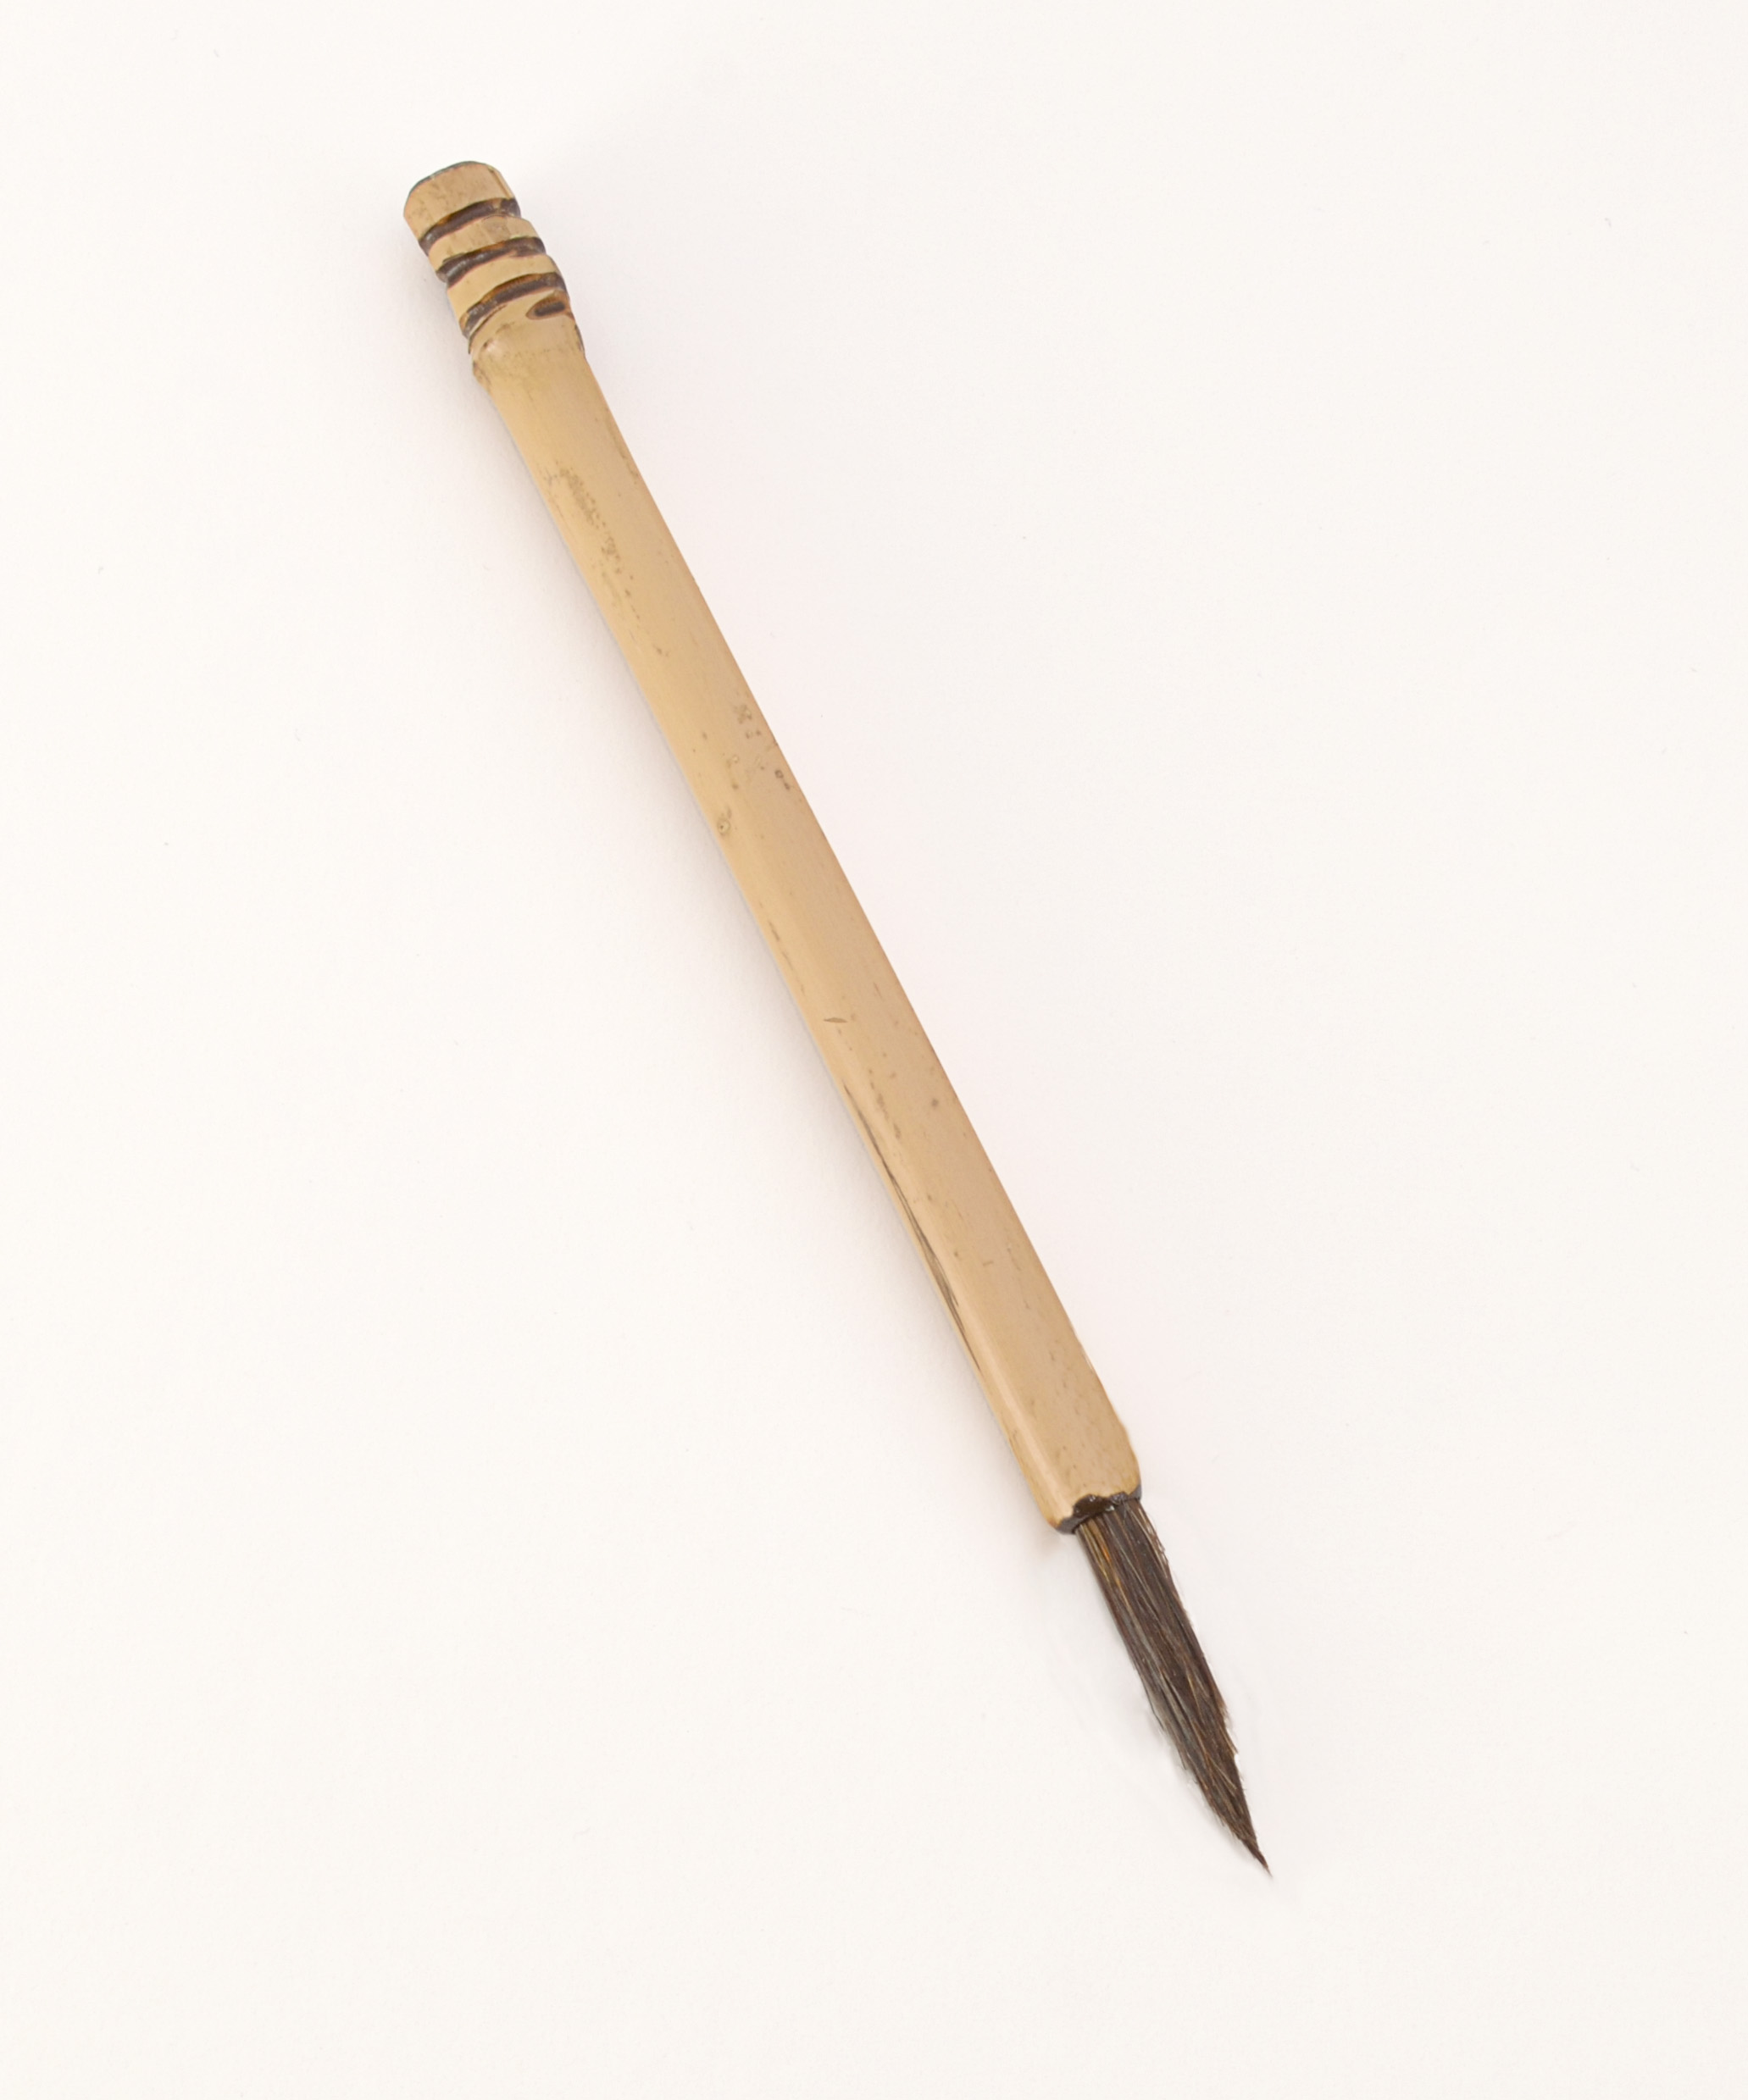 Sabeline bristle with bamboo cane handle